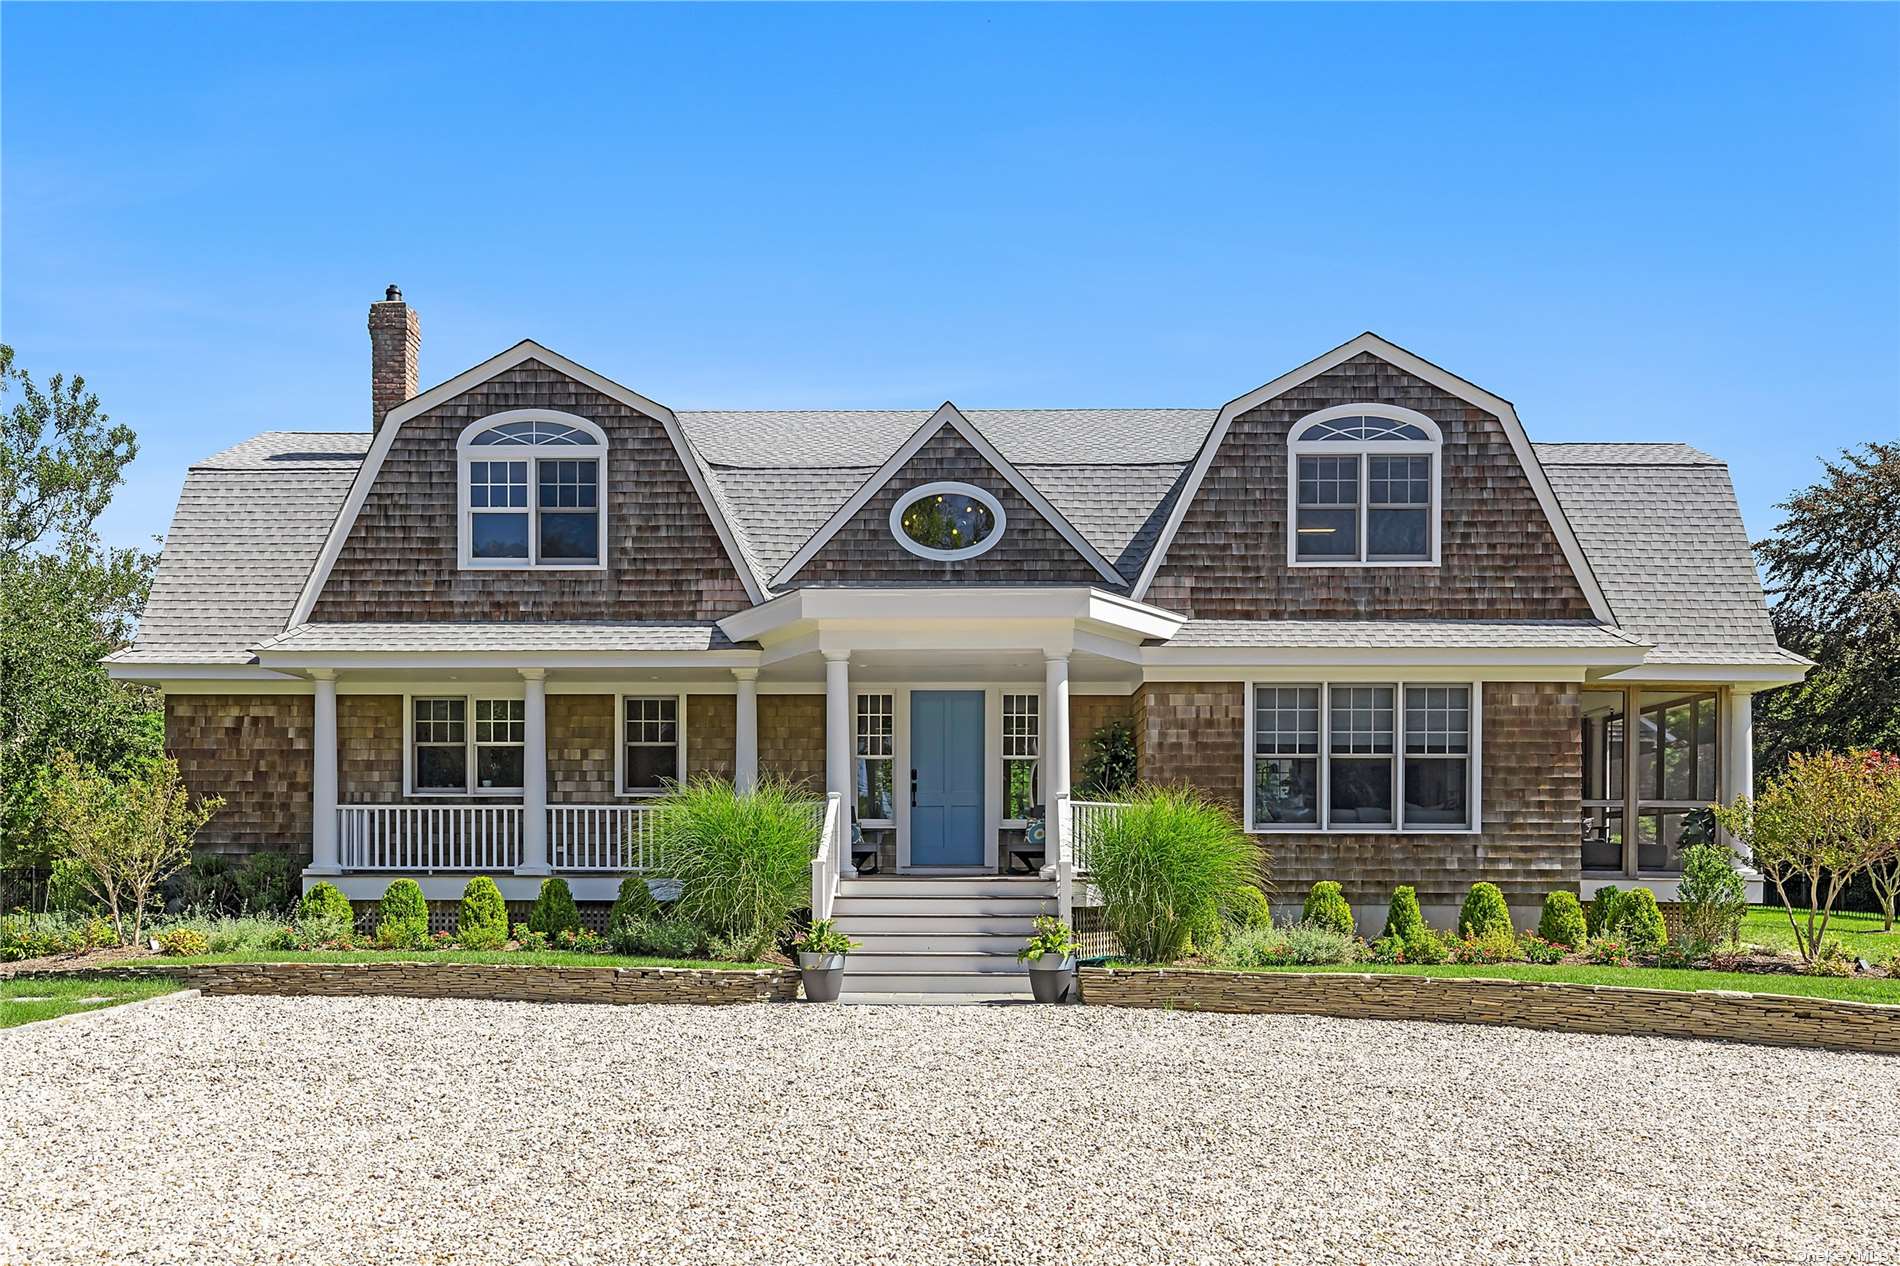 Property for Sale at 86 Beach Lane, Westhampton Beach, Hamptons, NY - Bedrooms: 6 
Bathrooms: 6  - $6,499,000